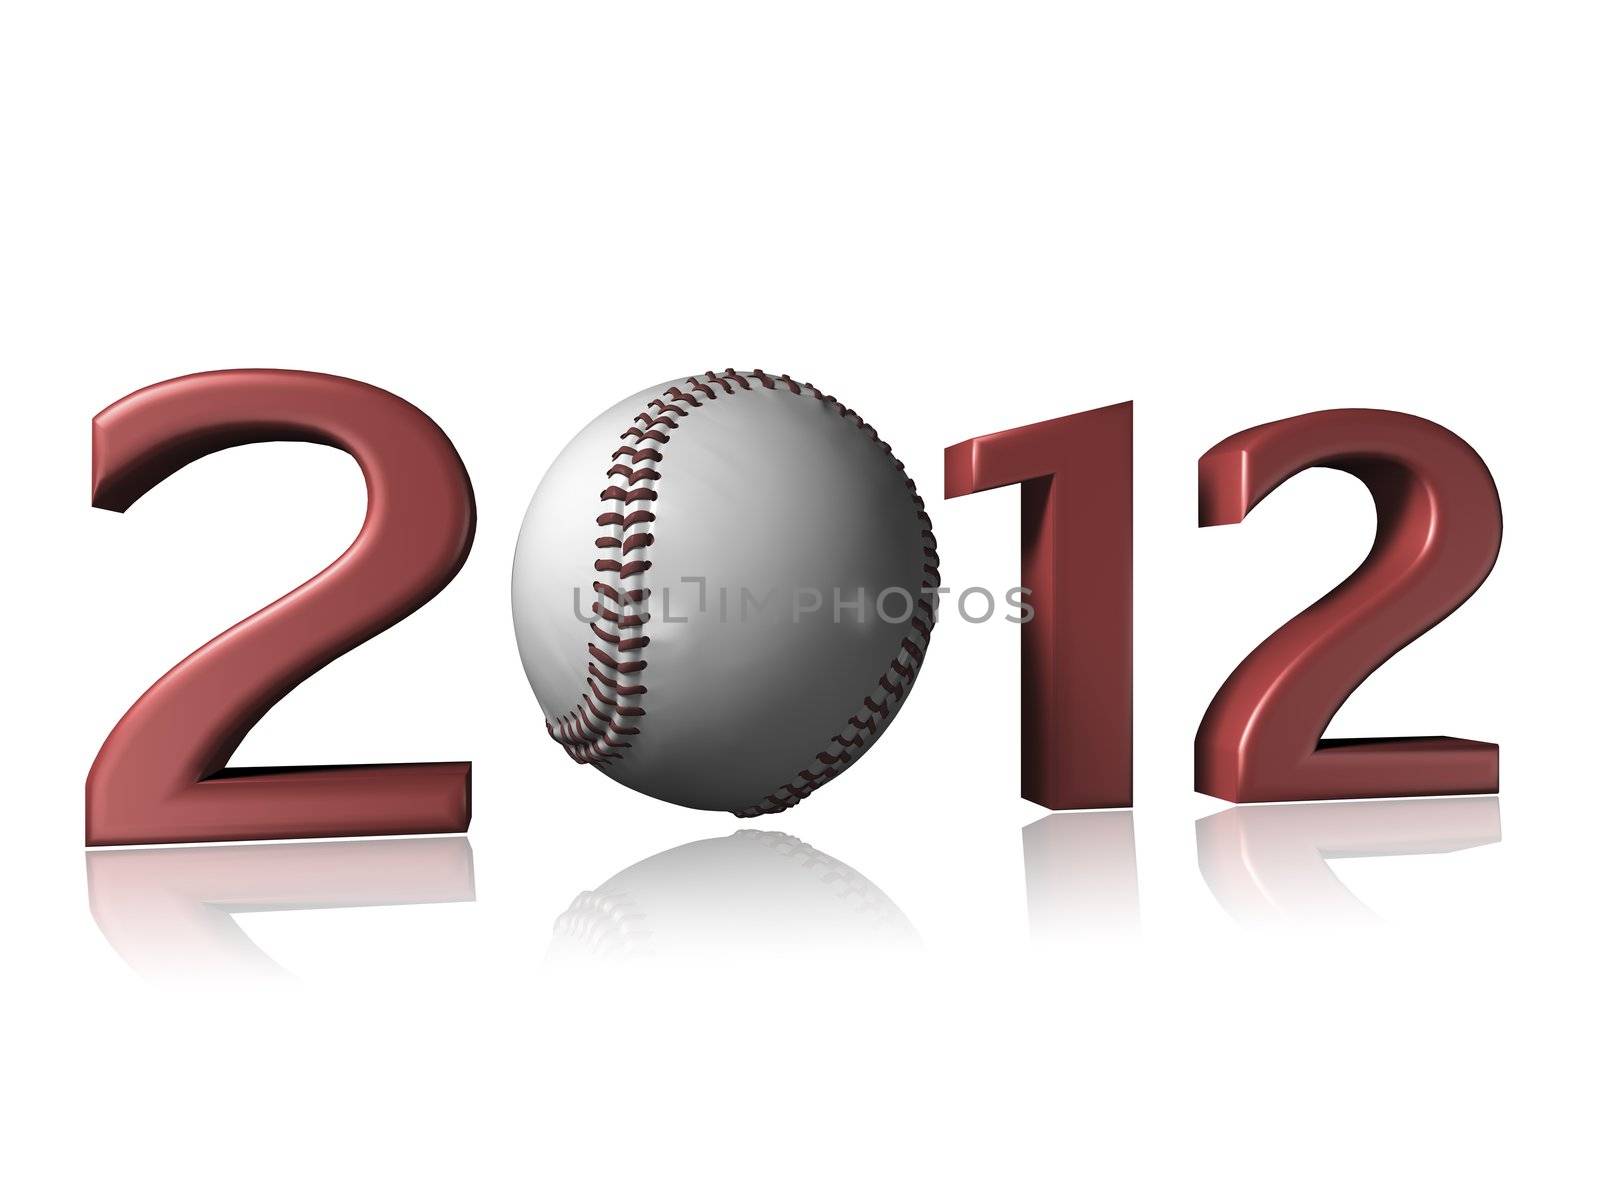 2012 baseball design on a white background with a little reflection